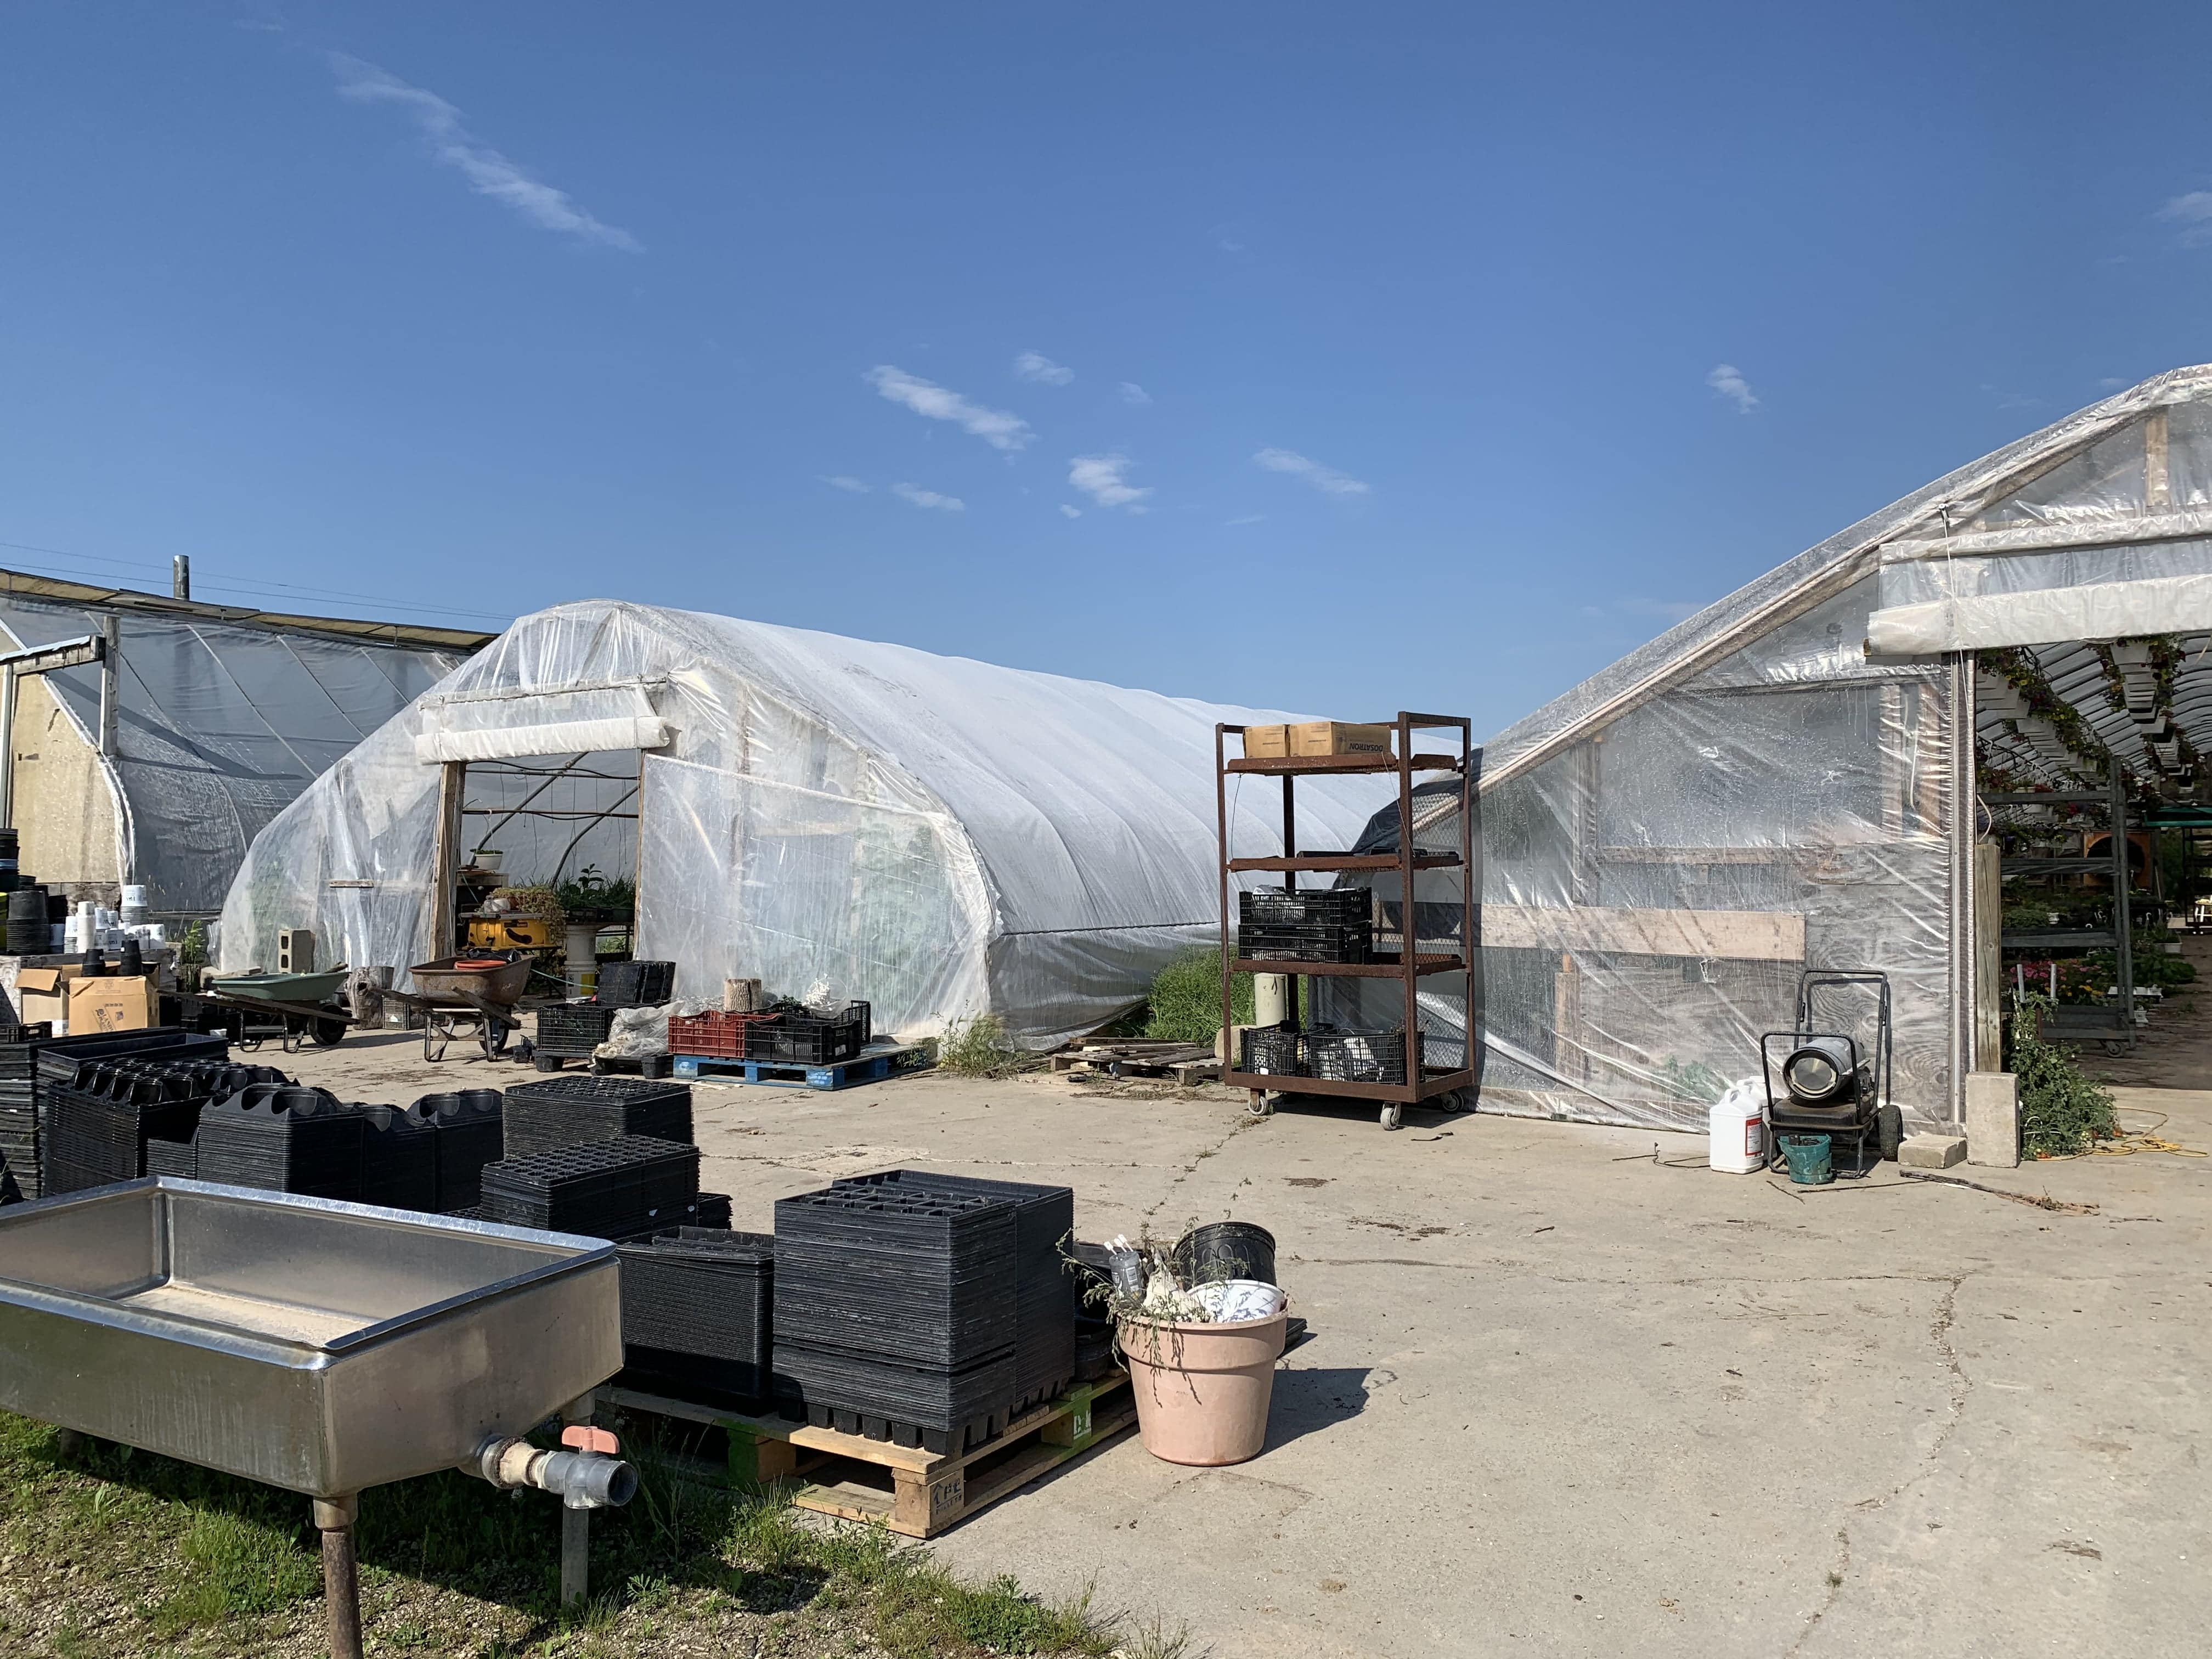 2 greenhouses with plants & equipment in front.